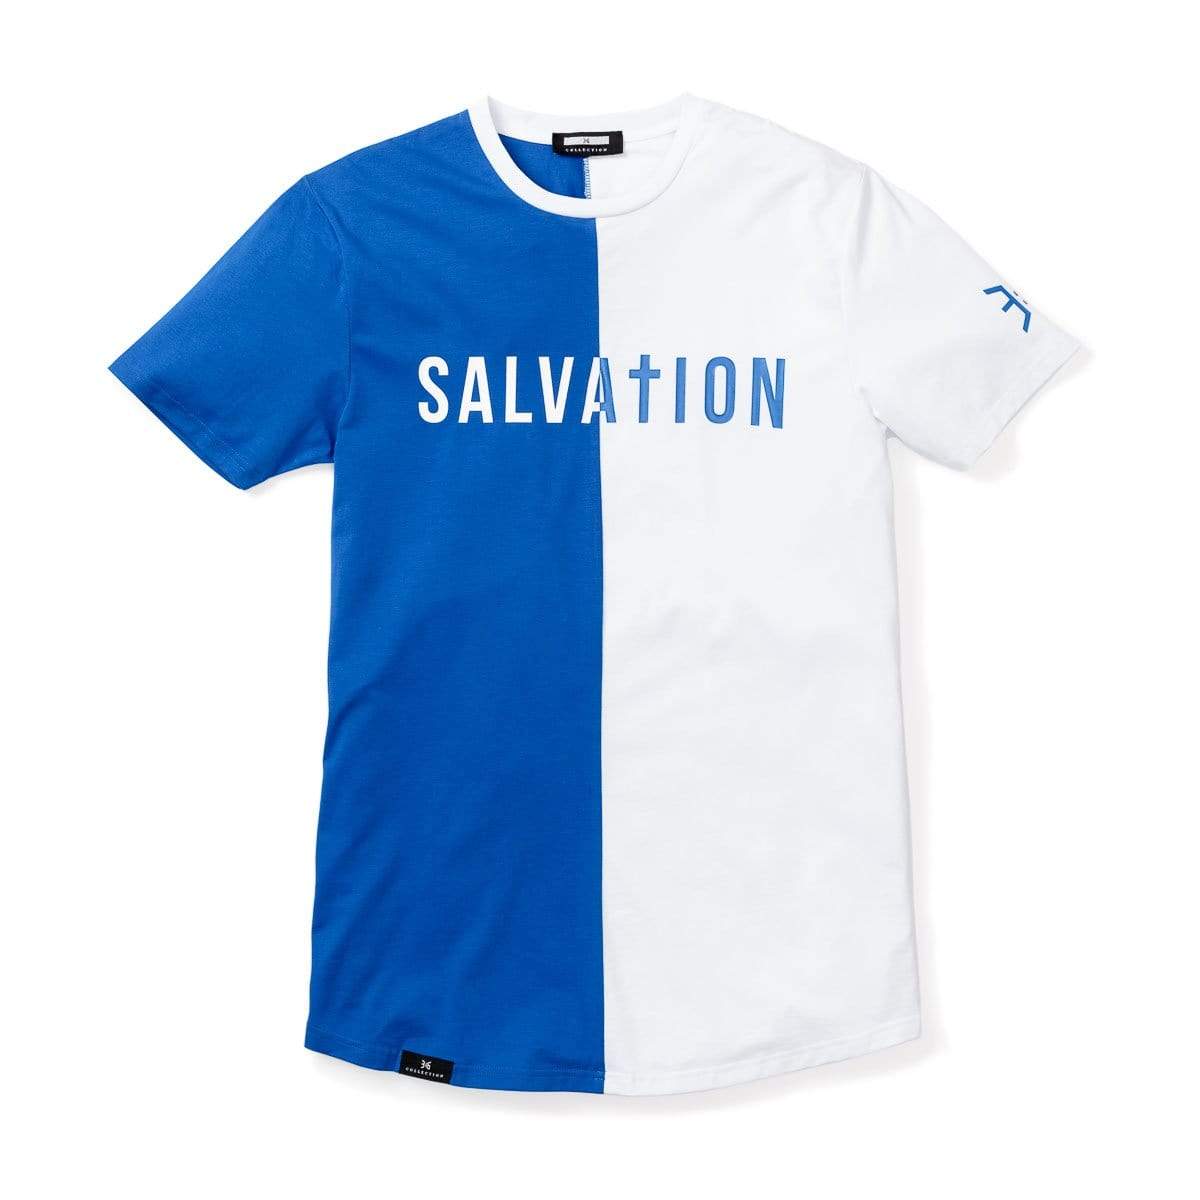 3:16 Collection Apparel Salvation Vertical Block Swoop Tee - Royal and White